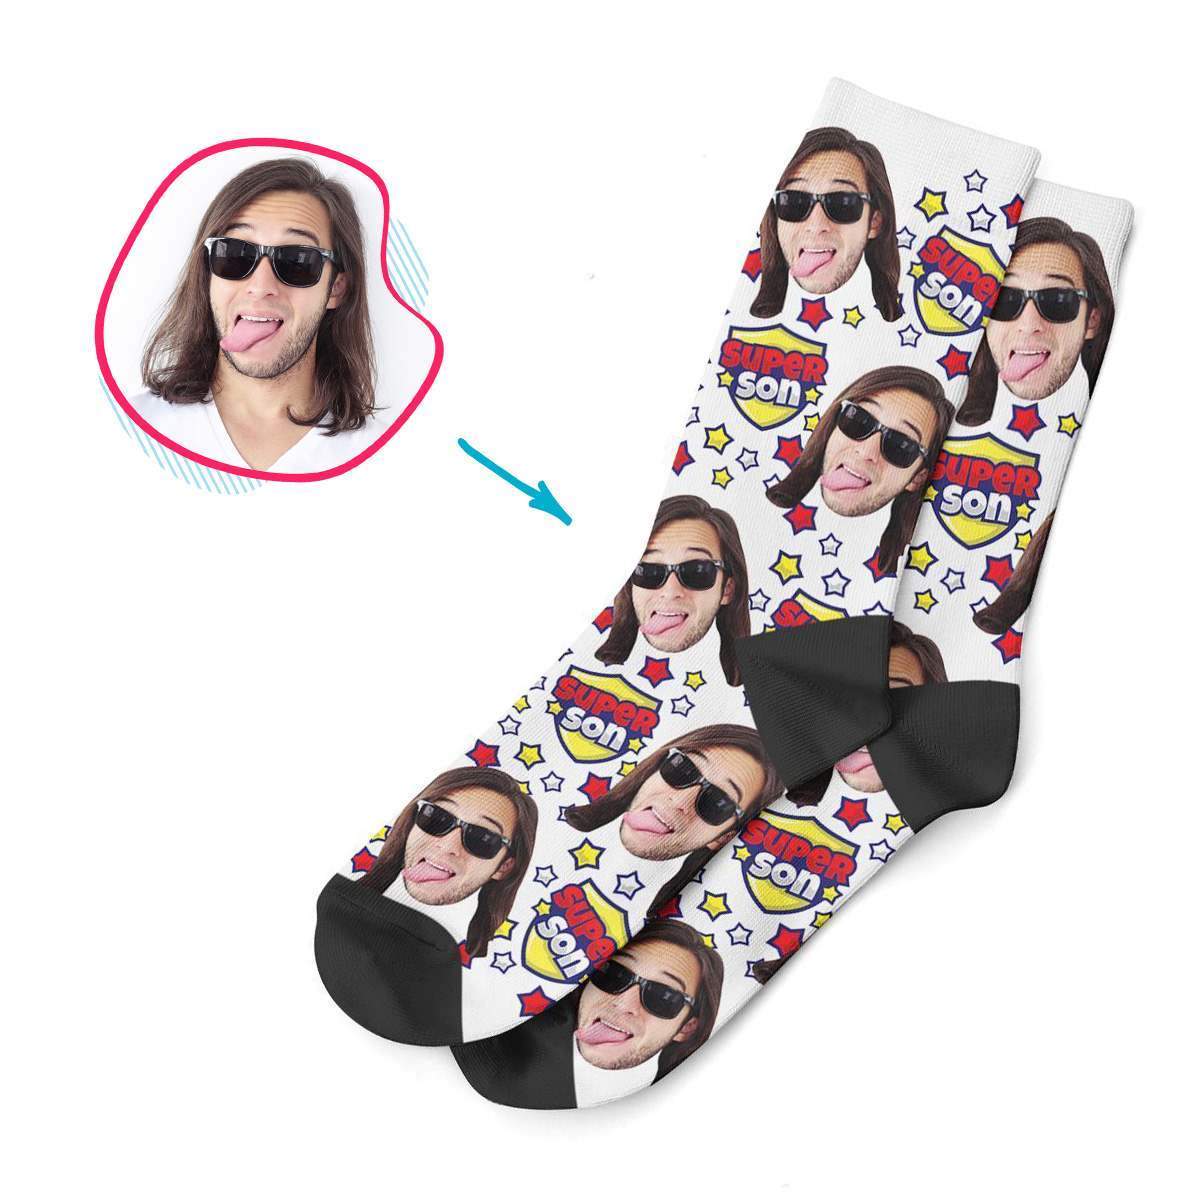 white Super Son socks personalized with photo of face printed on them